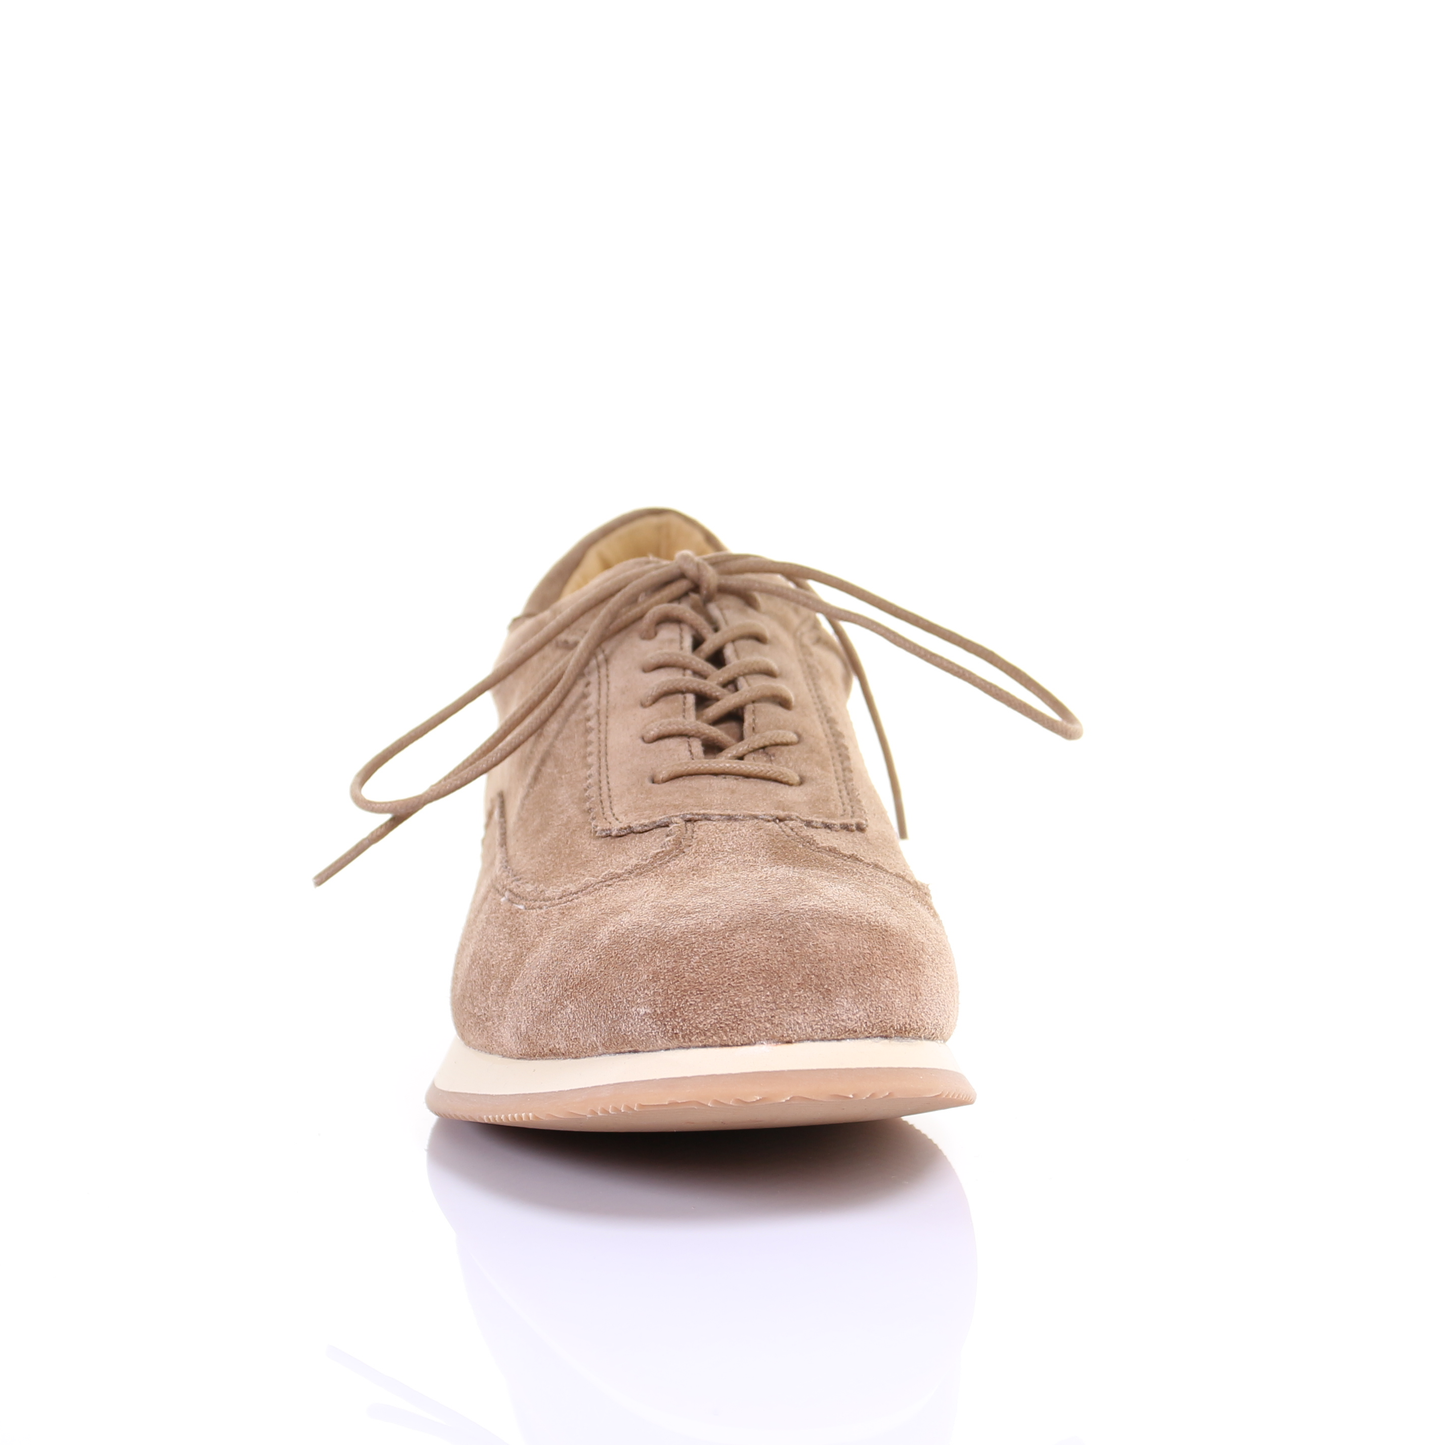 Men's Style Lace Up Suede Leather Casual Shoes (Beige)